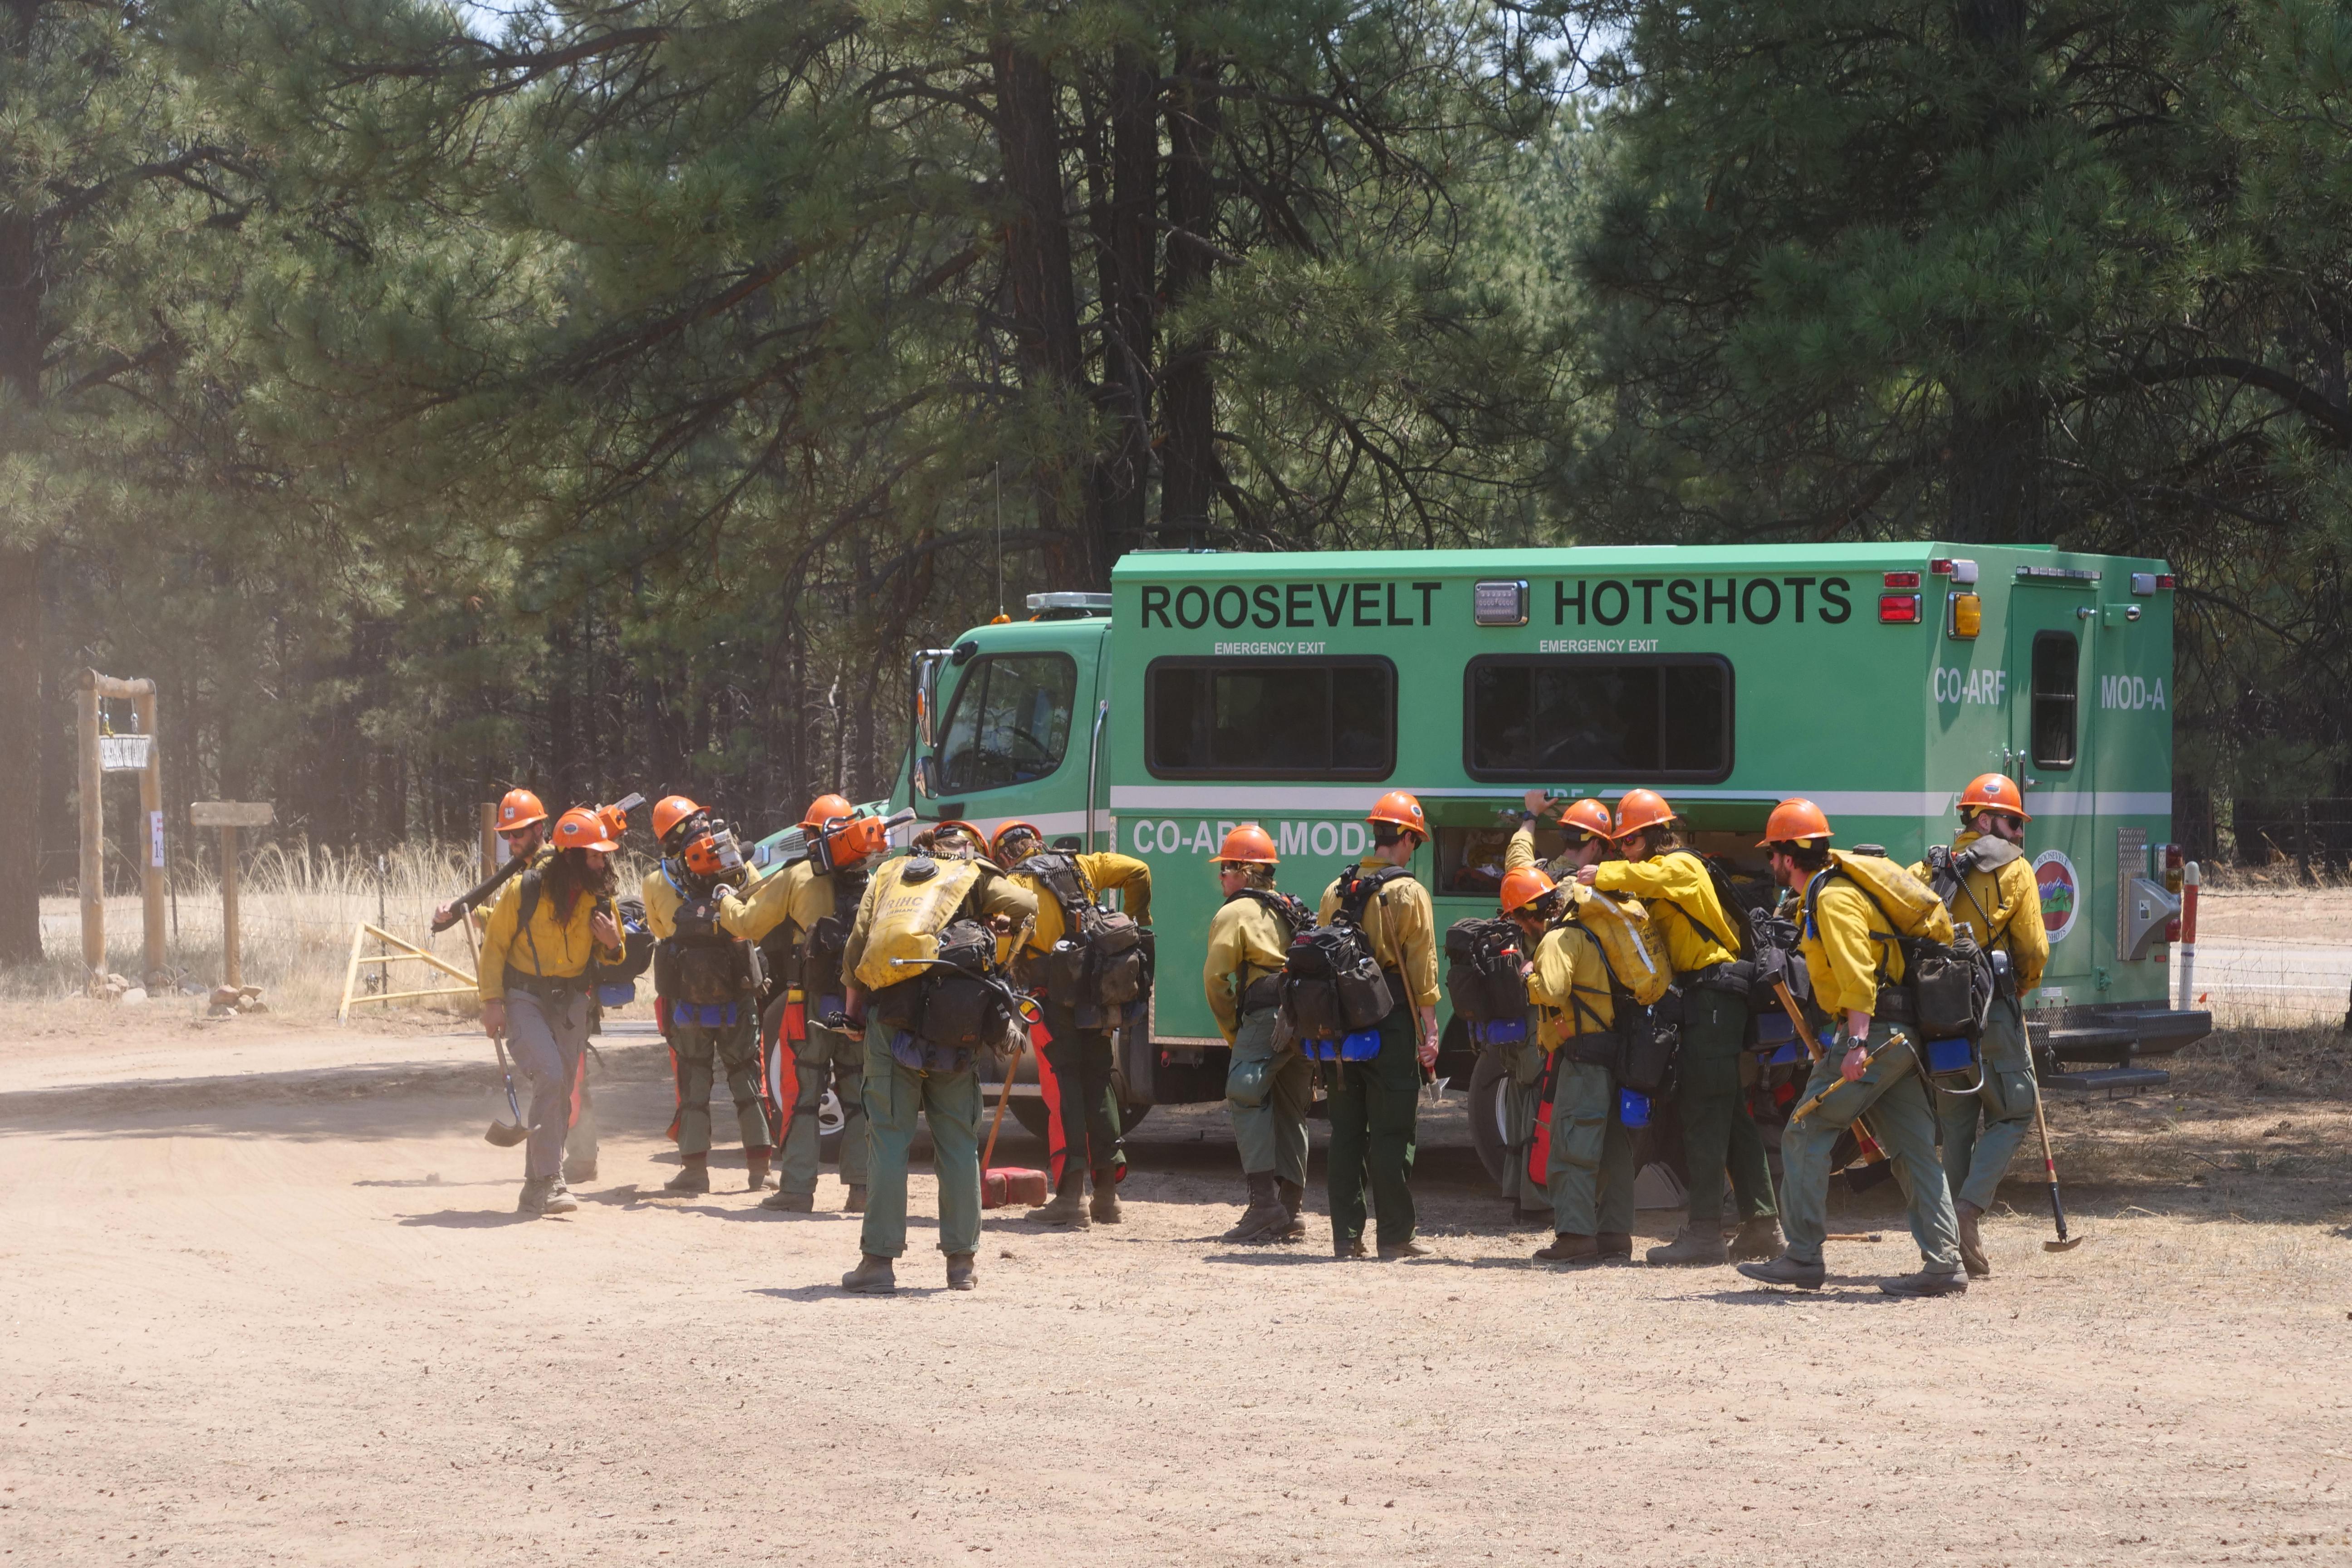 A group of firefighters in yellow shirts, orange helmets and other protective gear prepare to fight a forest fire.